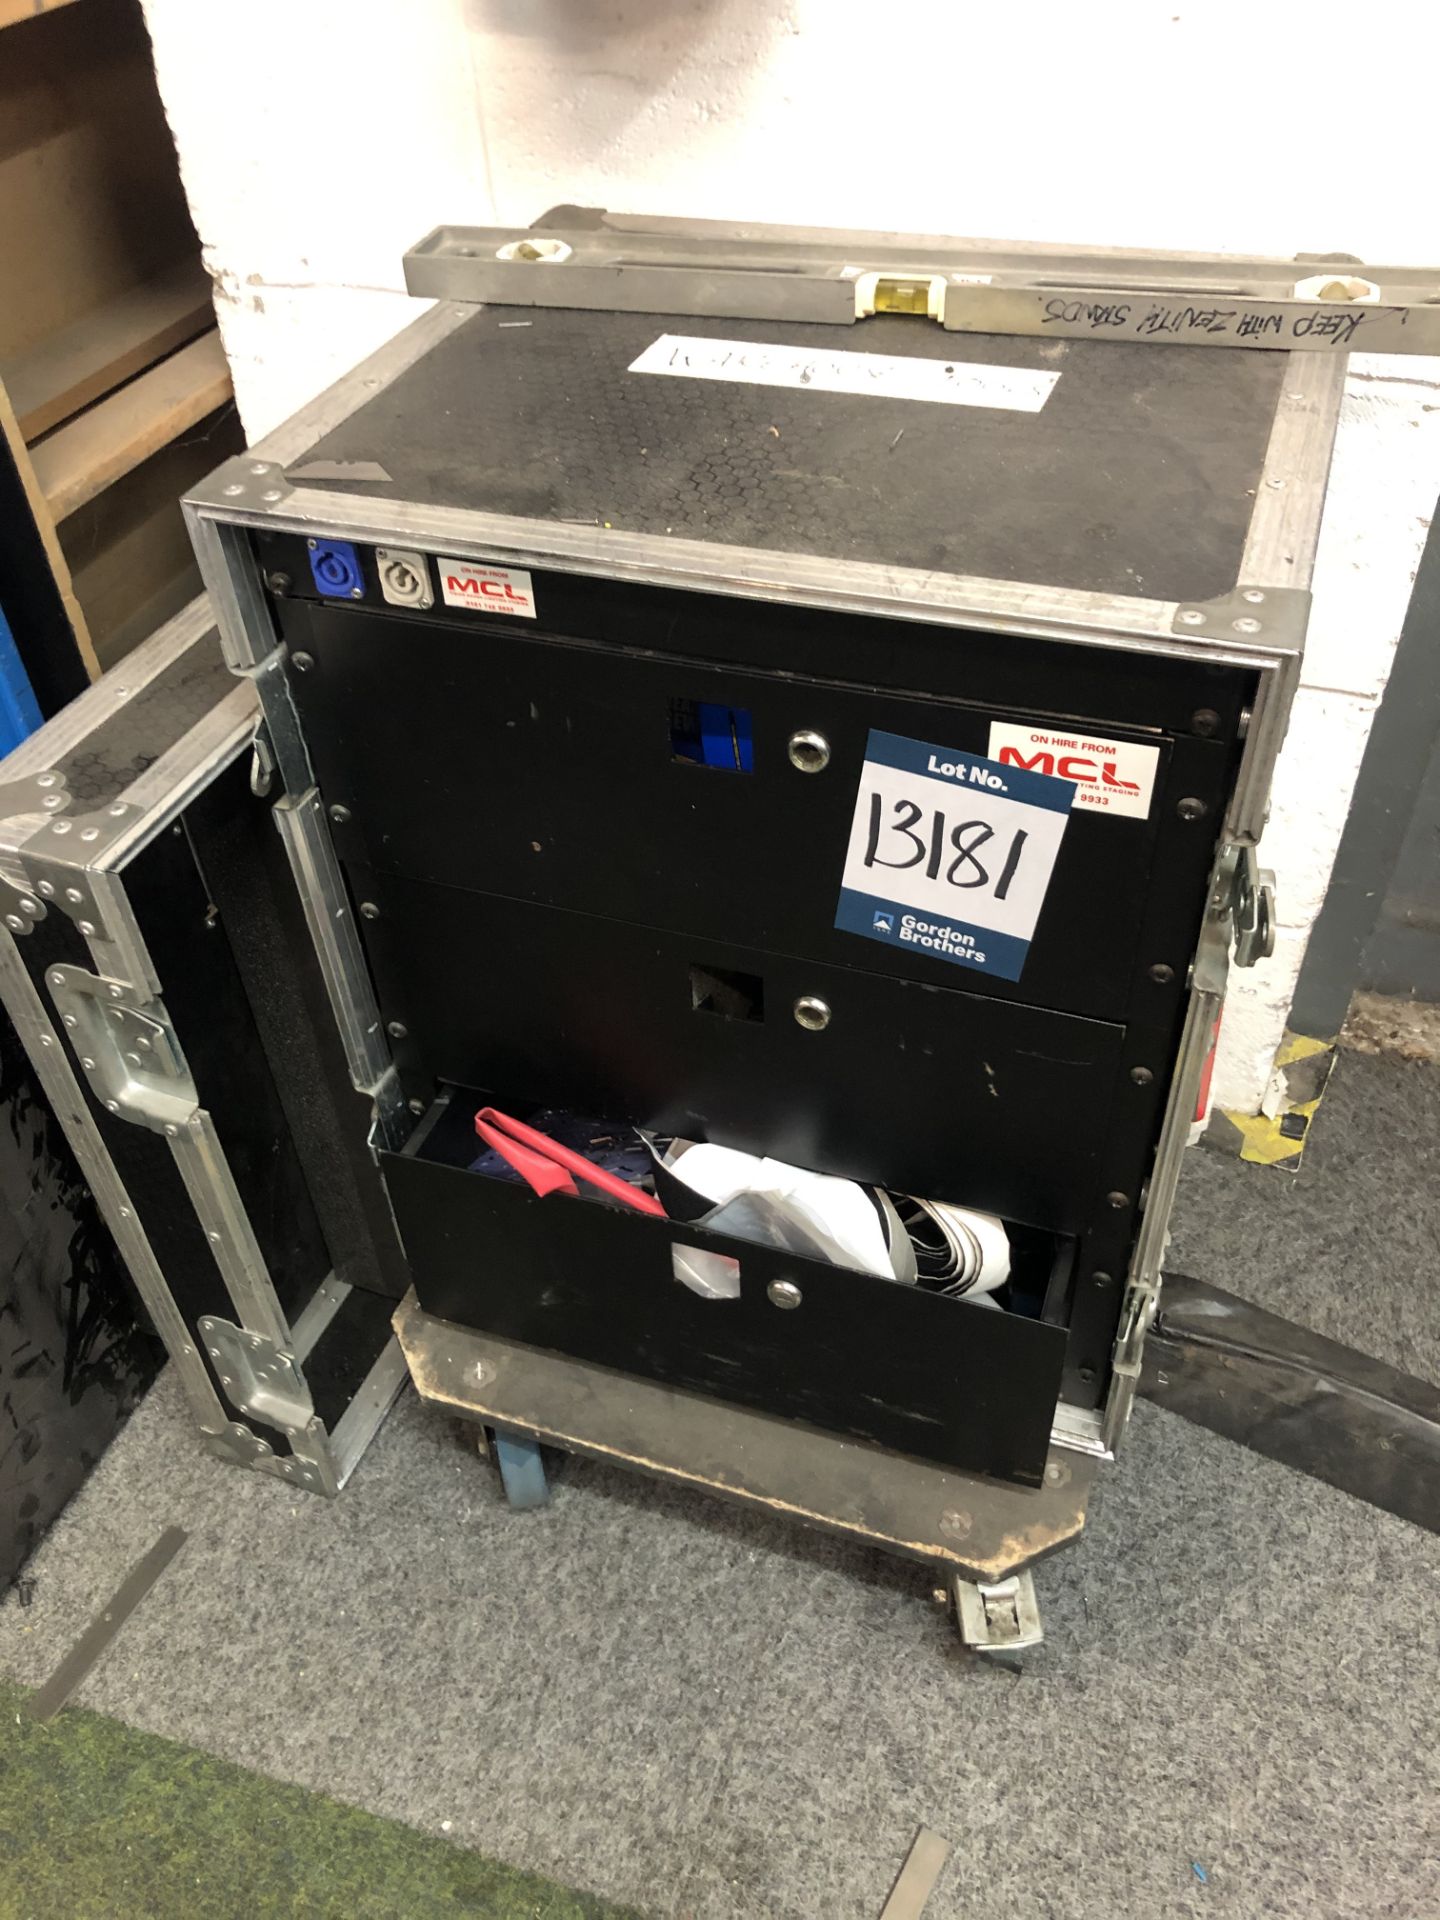 Tool box housed in transit case with tool contents